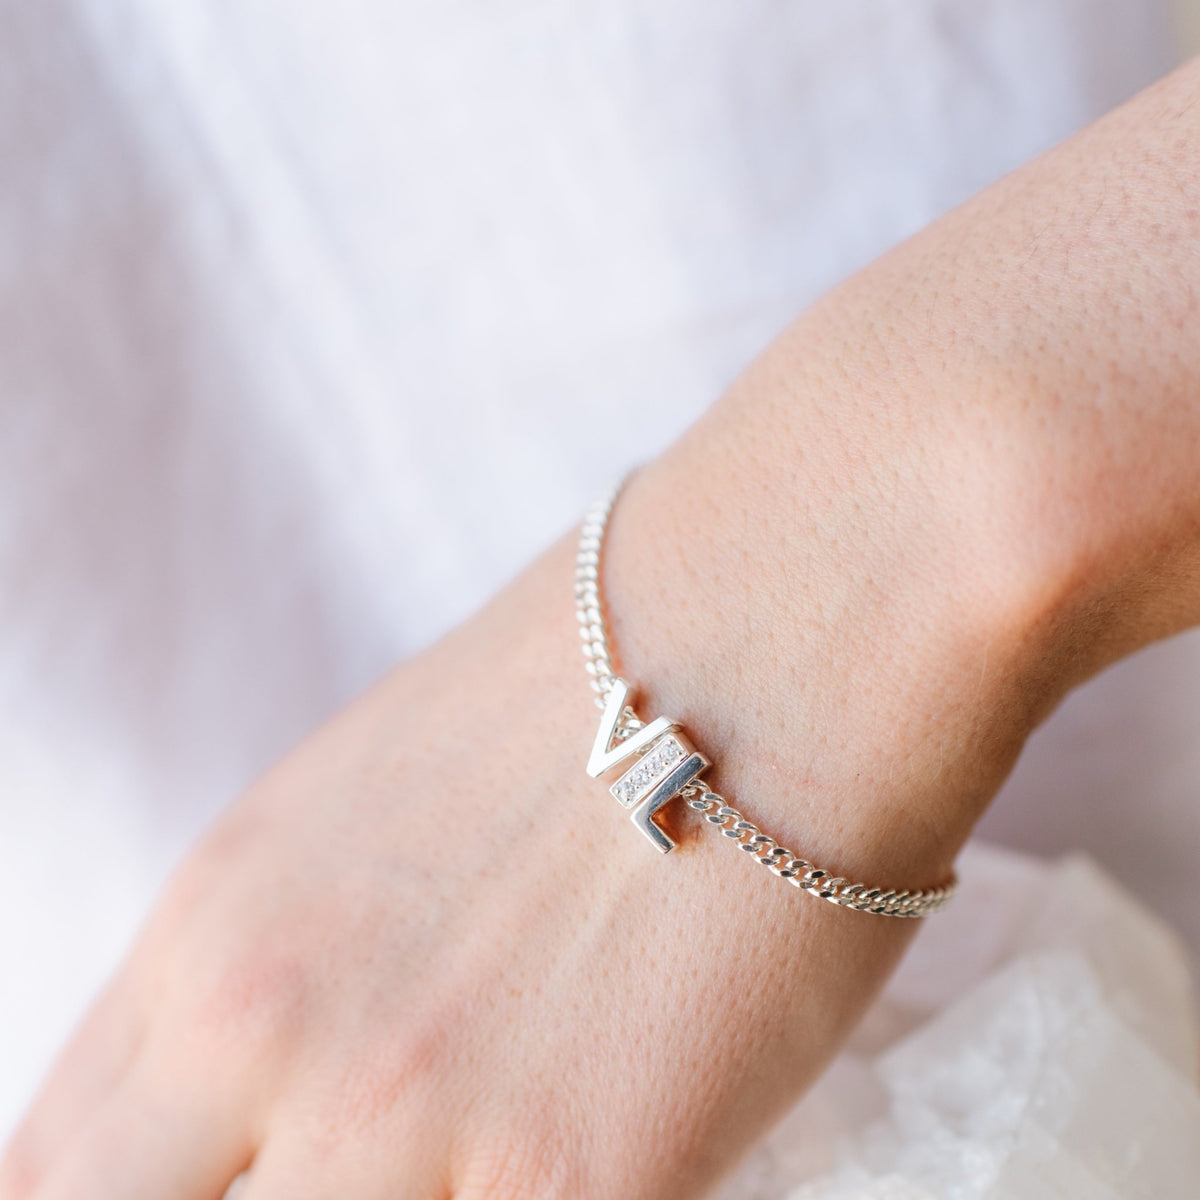 CHARMED LINK BRACELET - GOLD OR SILVER - SO PRETTY CARA COTTER